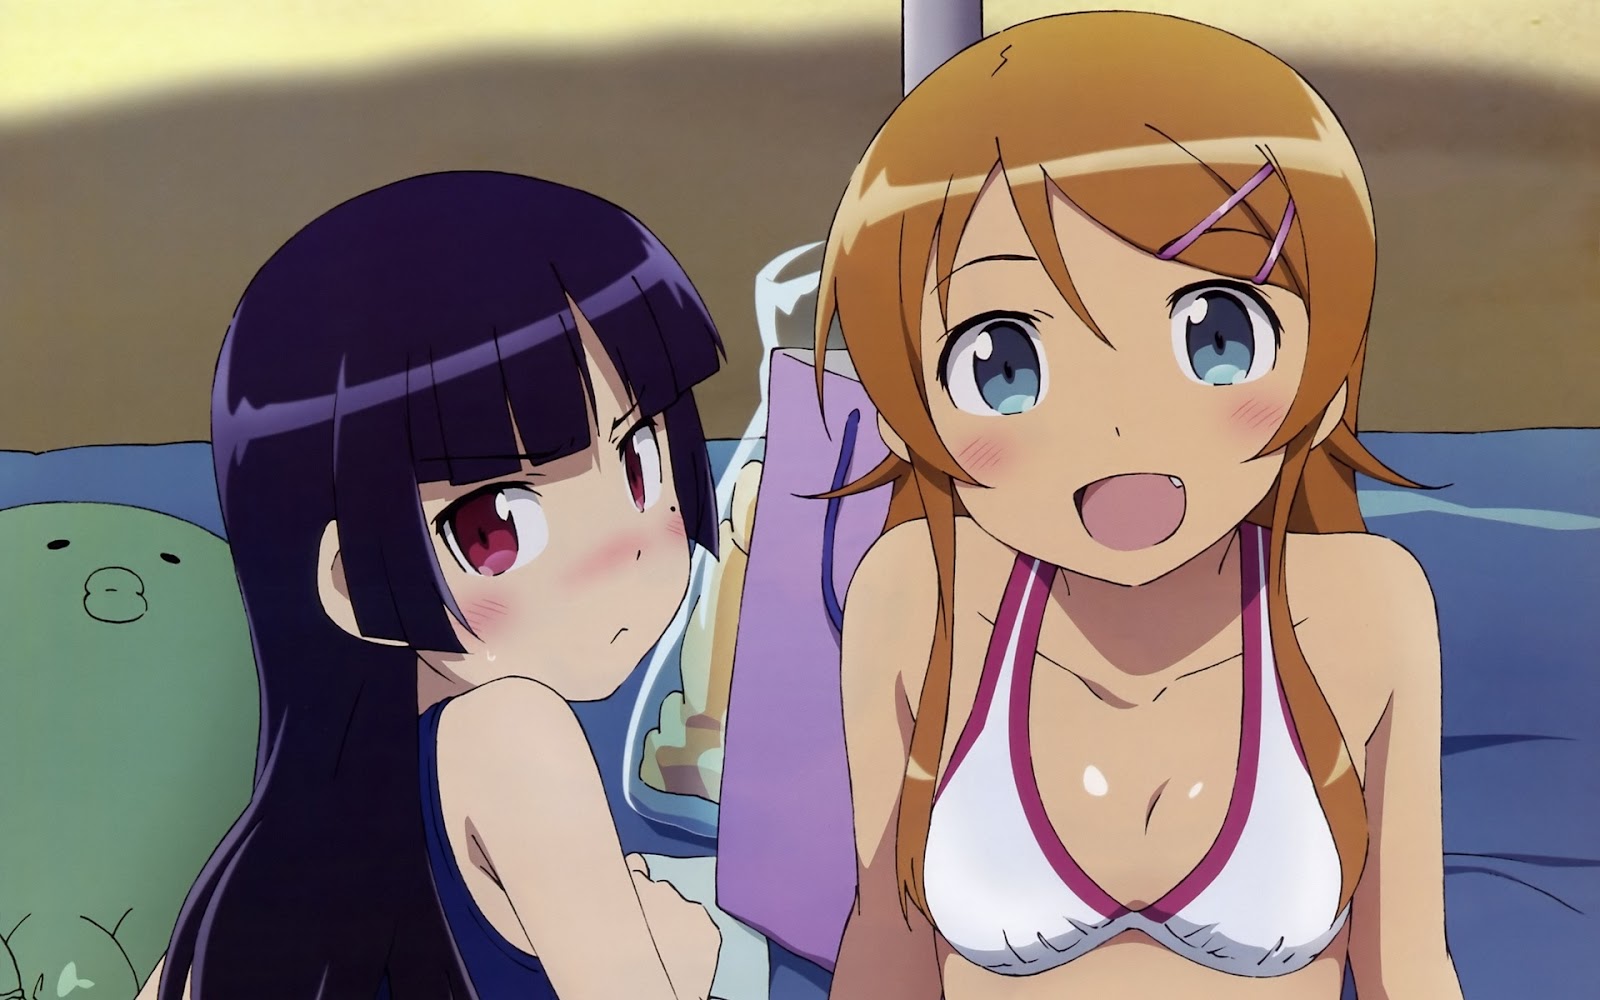 Give me Kuroneko from Oreimo pictures.